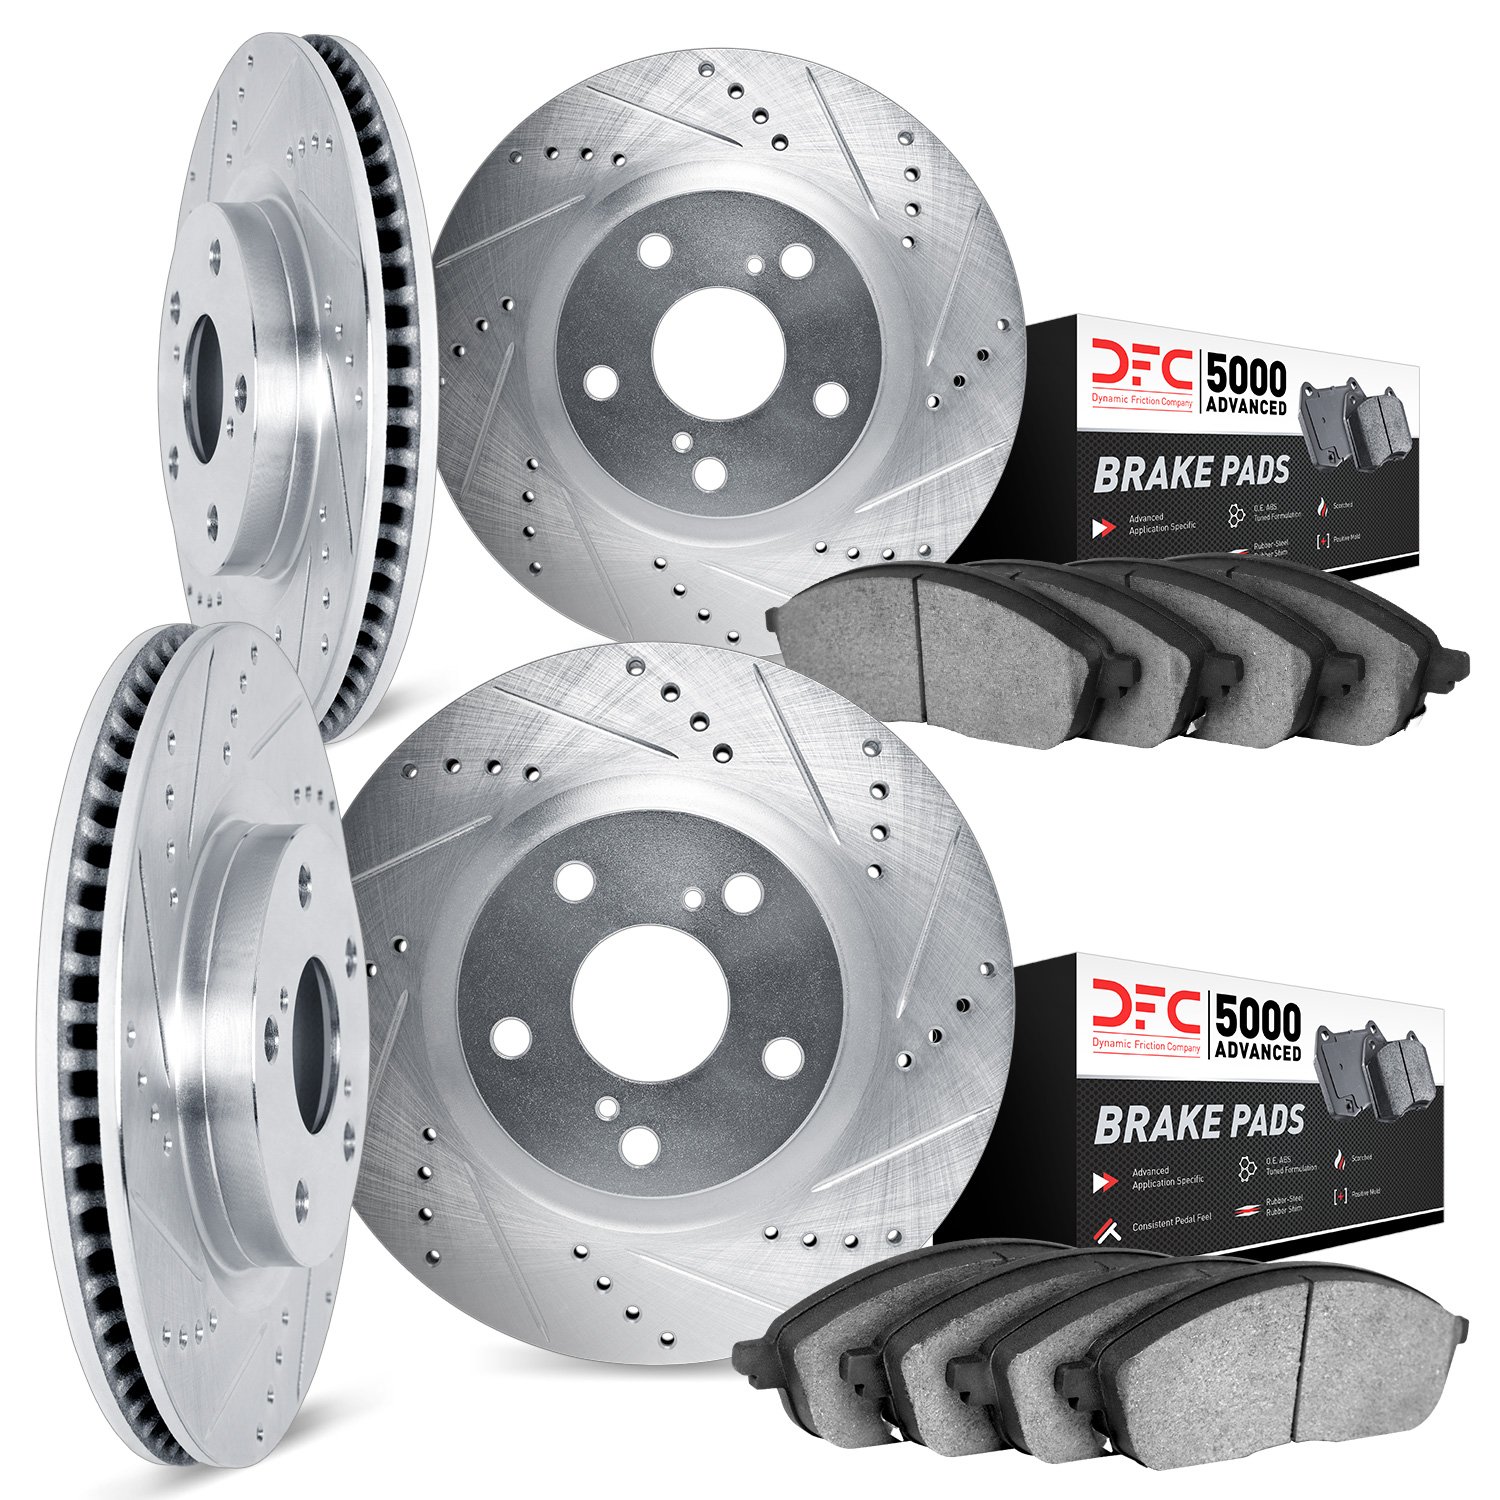 7504-13021 Drilled/Slotted Brake Rotors w/5000 Advanced Brake Pads Kit [Silver], Fits Select Subaru, Position: Front and Rear